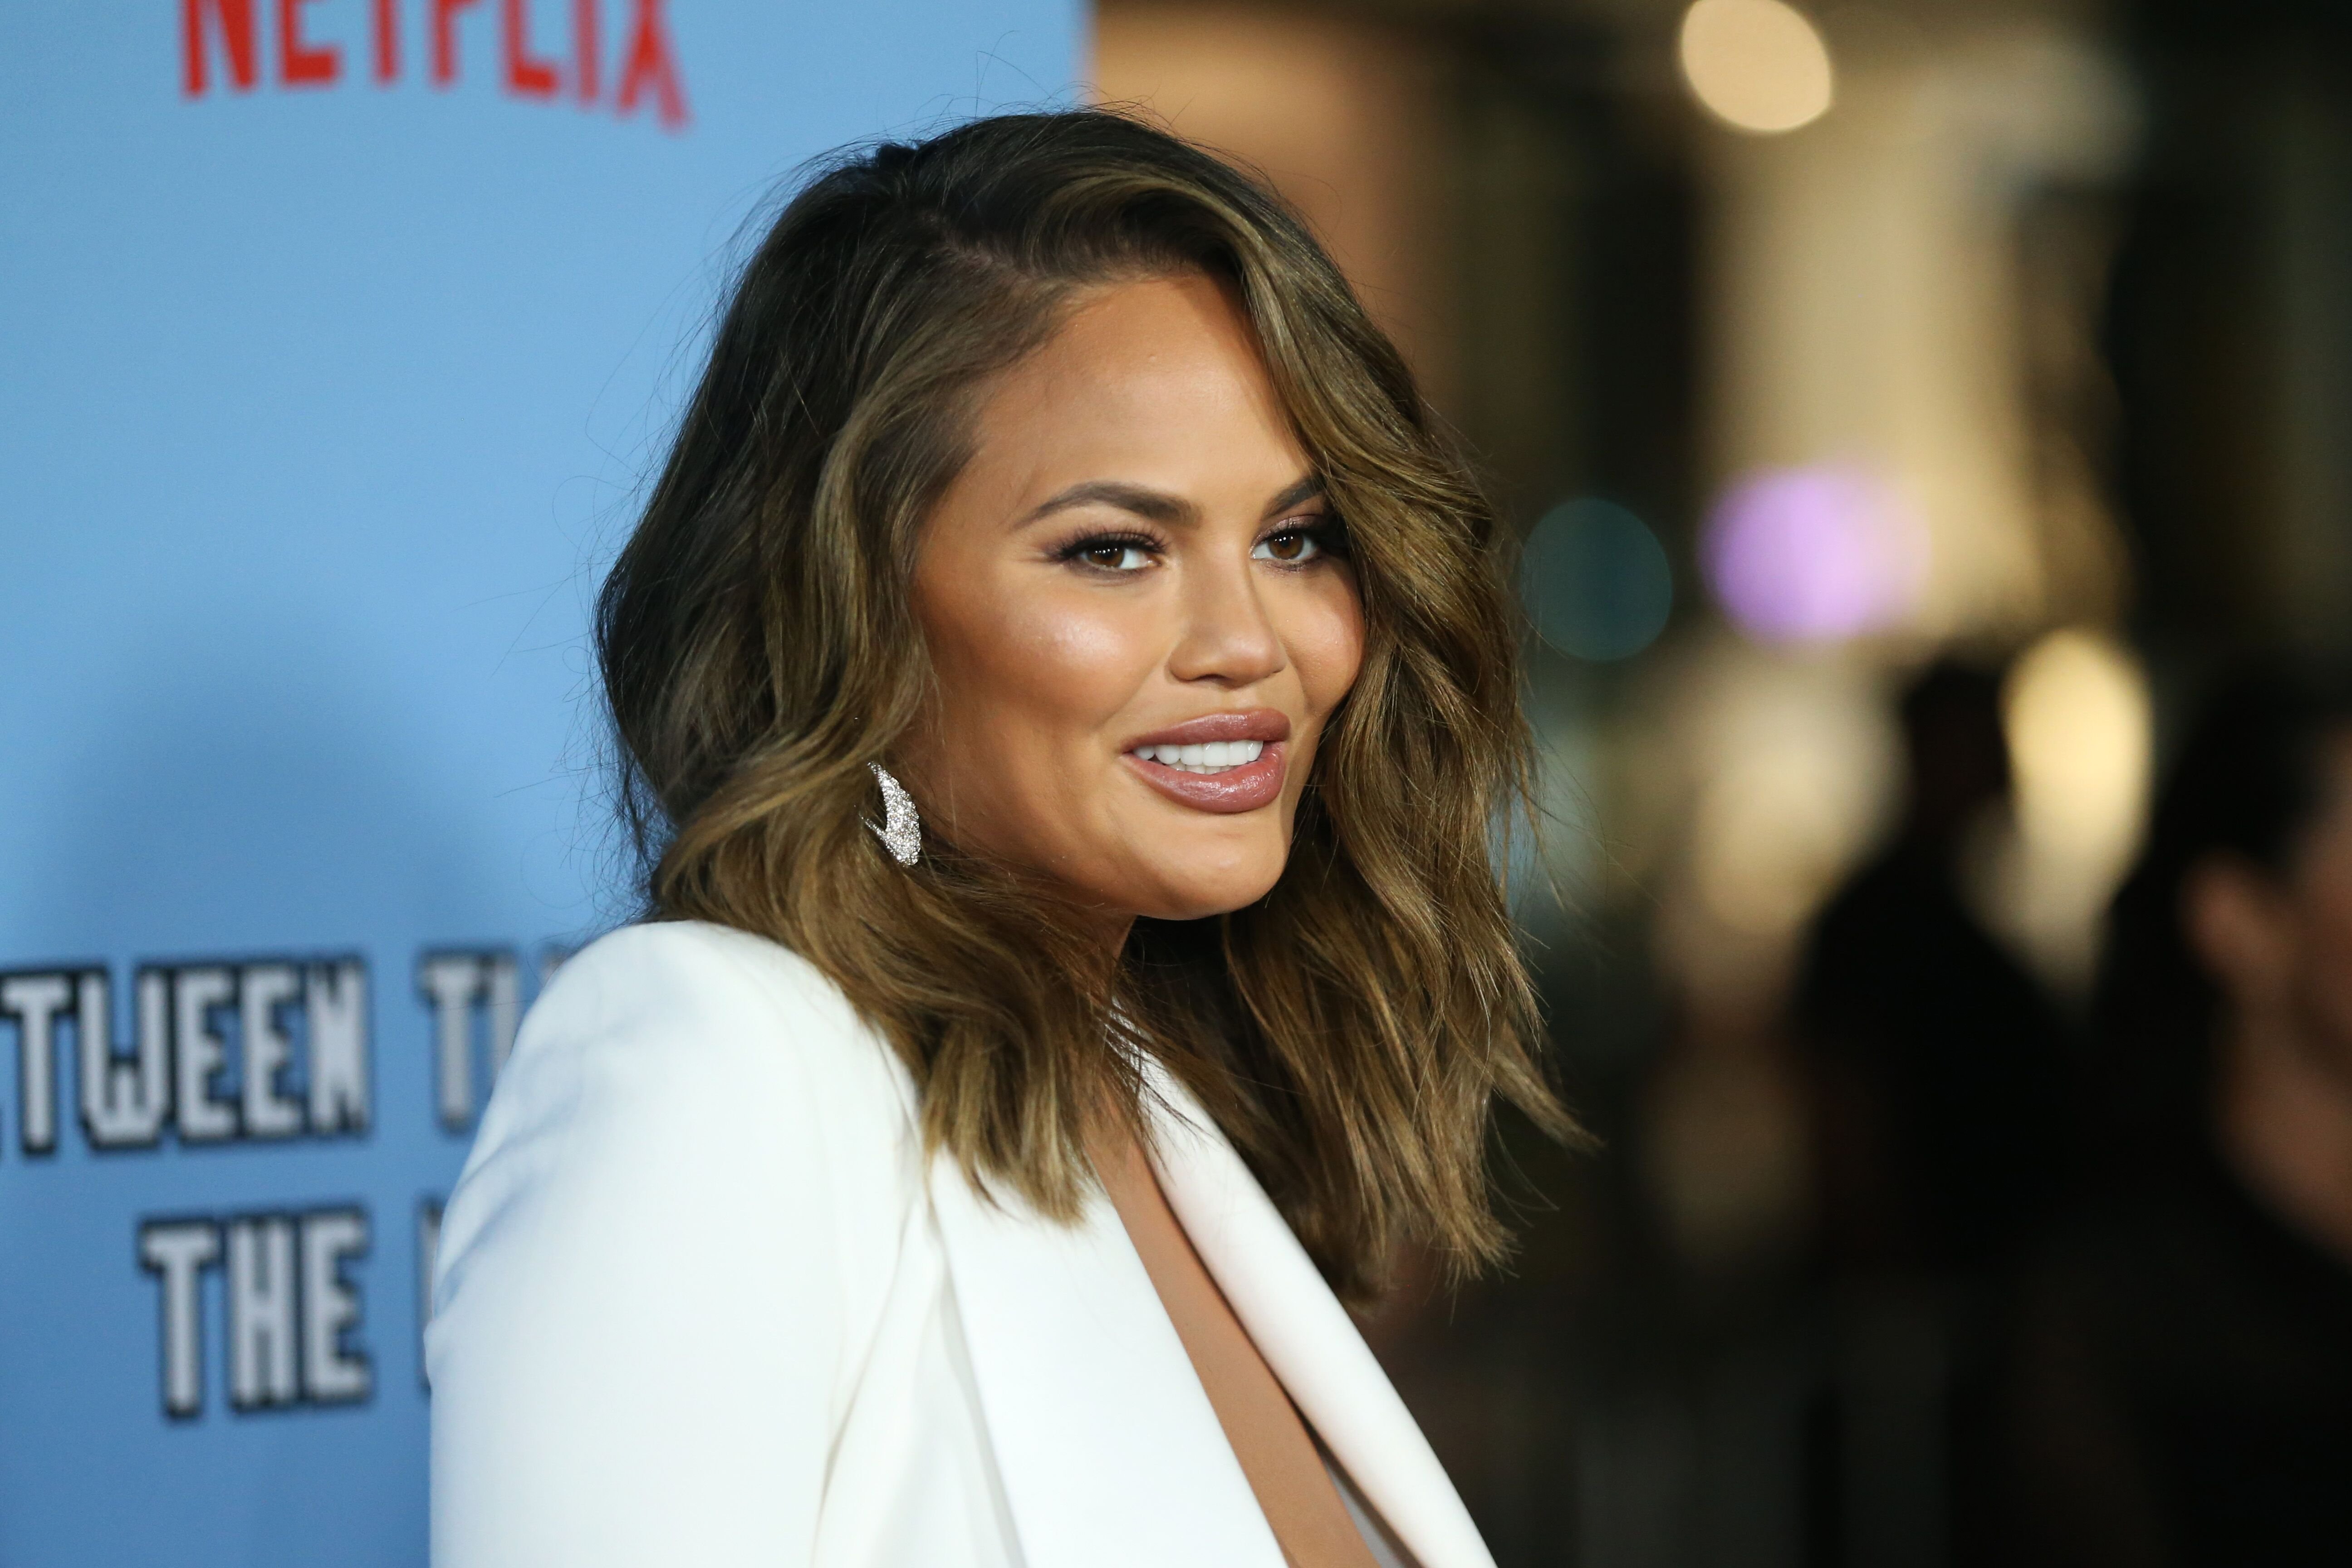 Chrissy Teigen at the LA premiere of Netflix's "Between Two Ferns: The Movie" on September 16, 2019, in Hollywood, California | Photo: Phillip Faraone/Getty Images